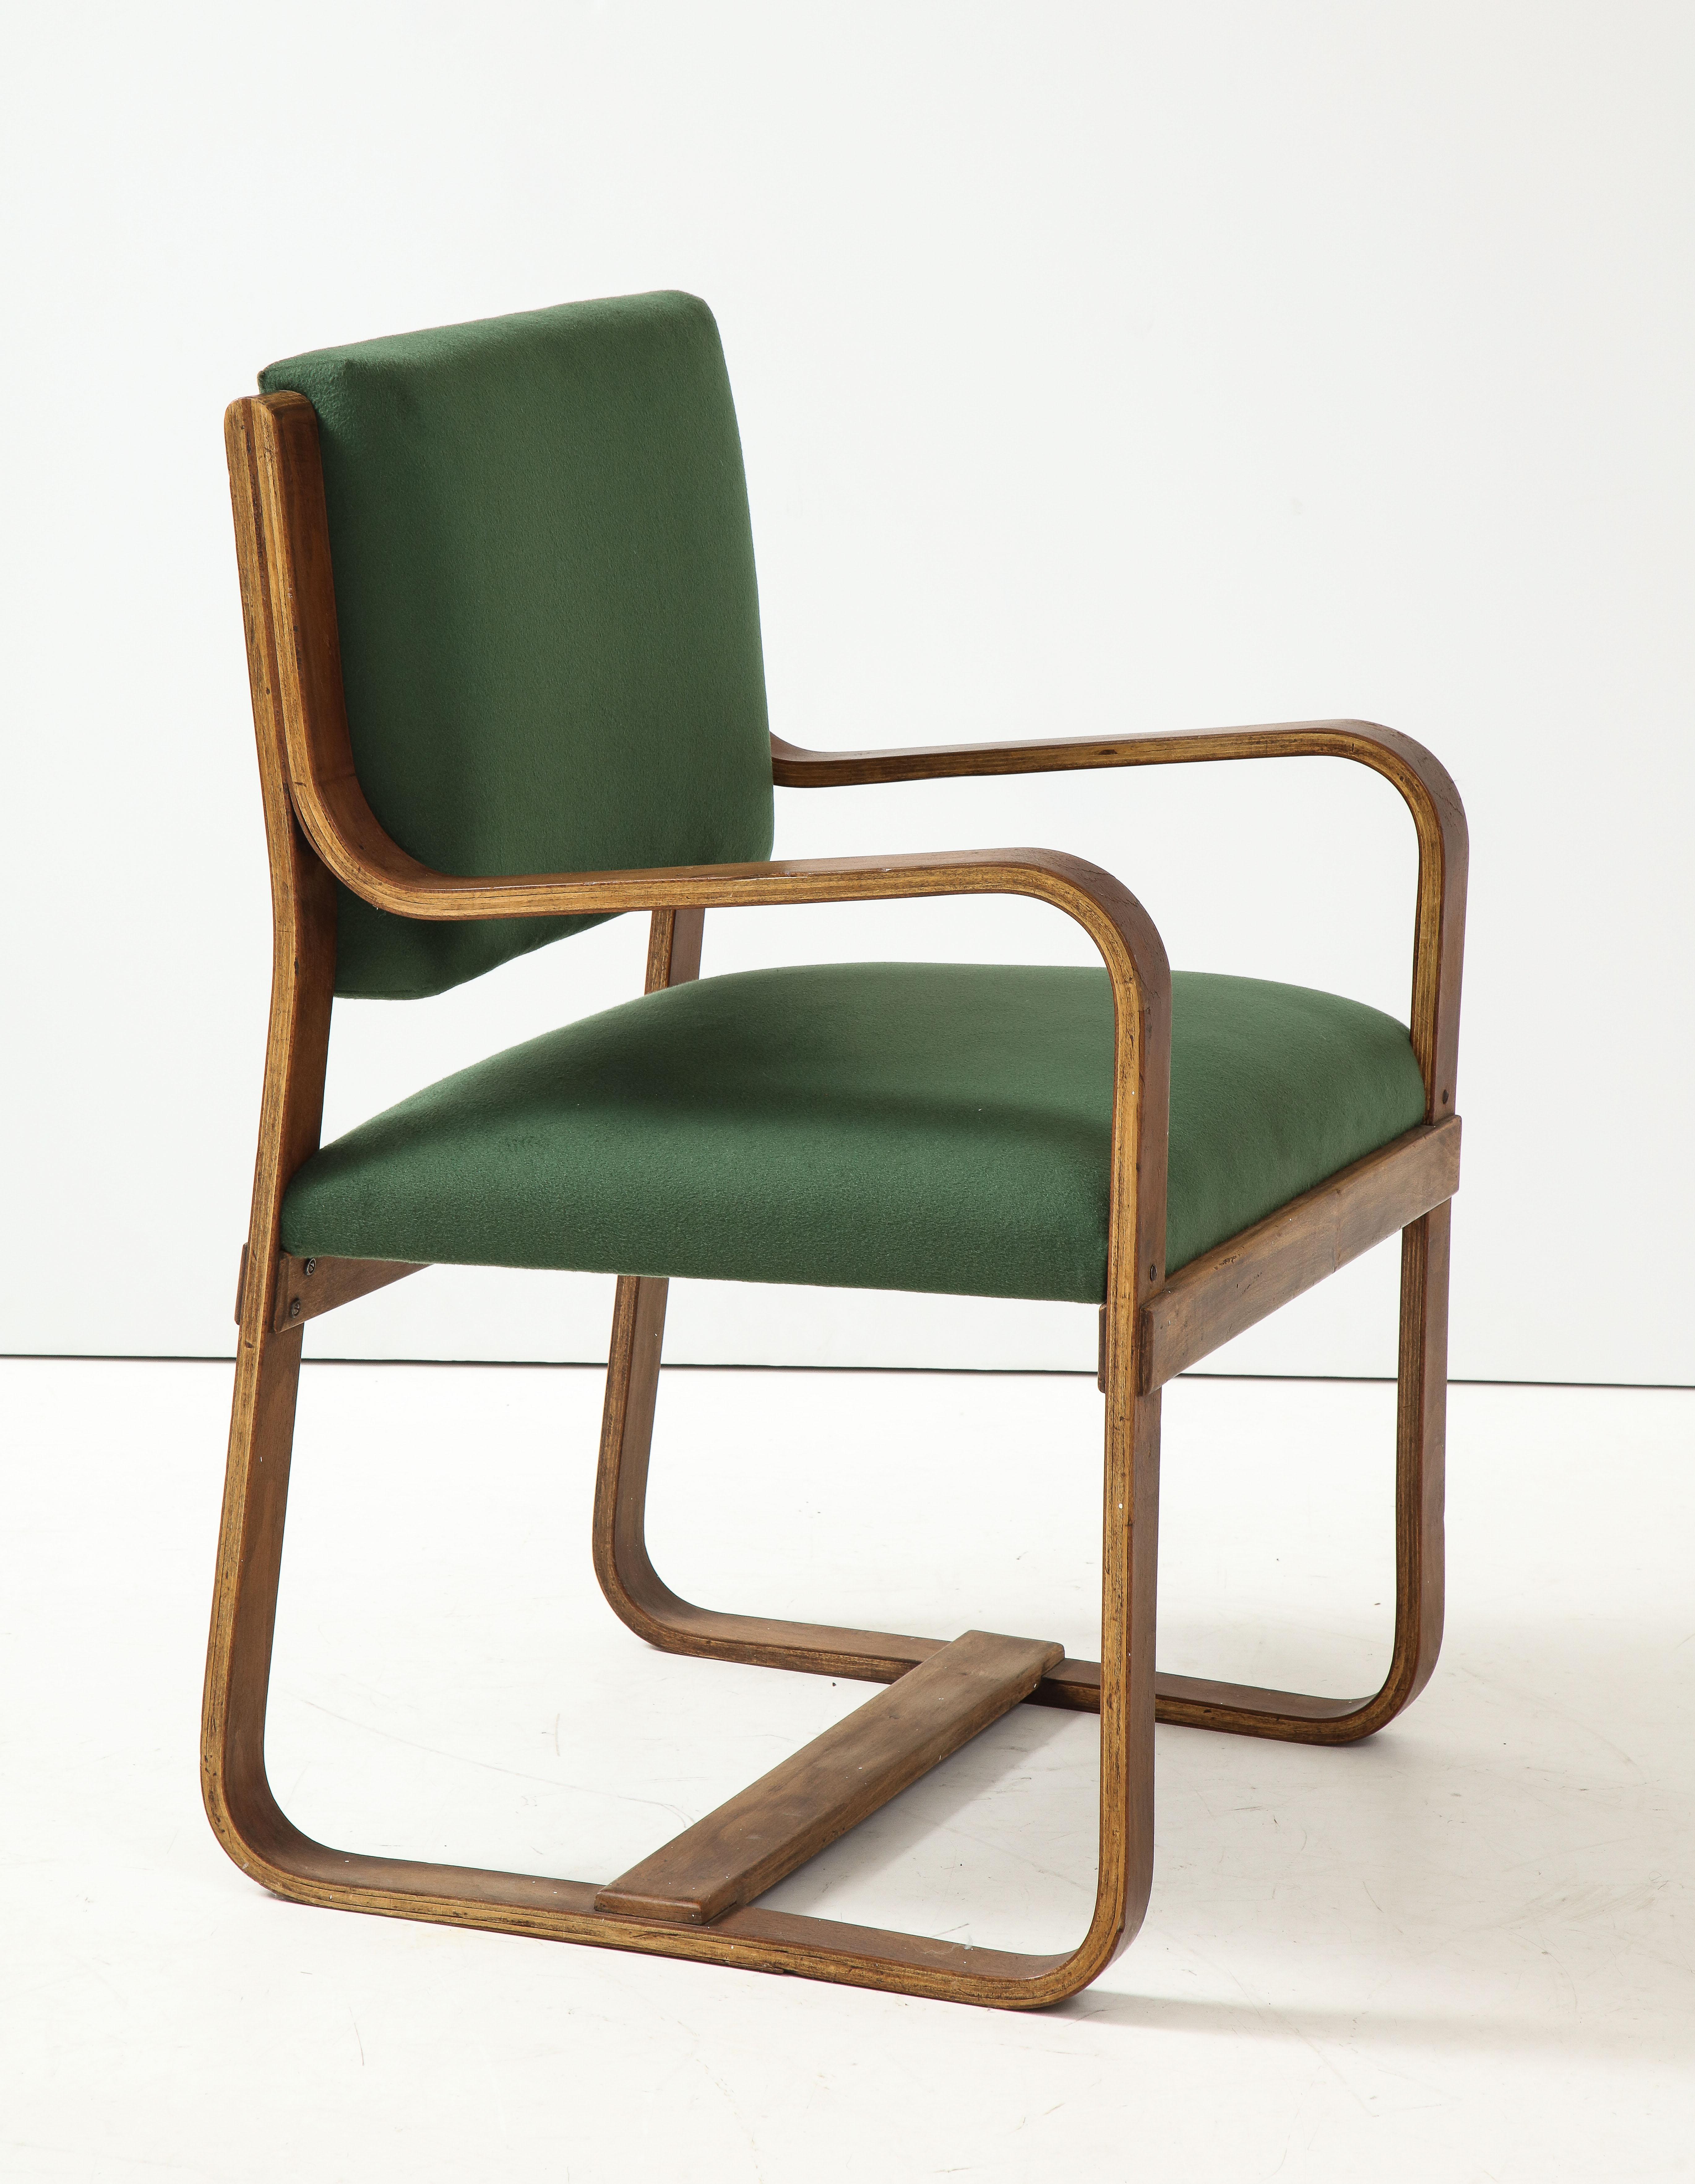 Italian Curved Laminated Wood Armchair in Green Cashmere by Giuseppe Pagano, c. 1940s For Sale